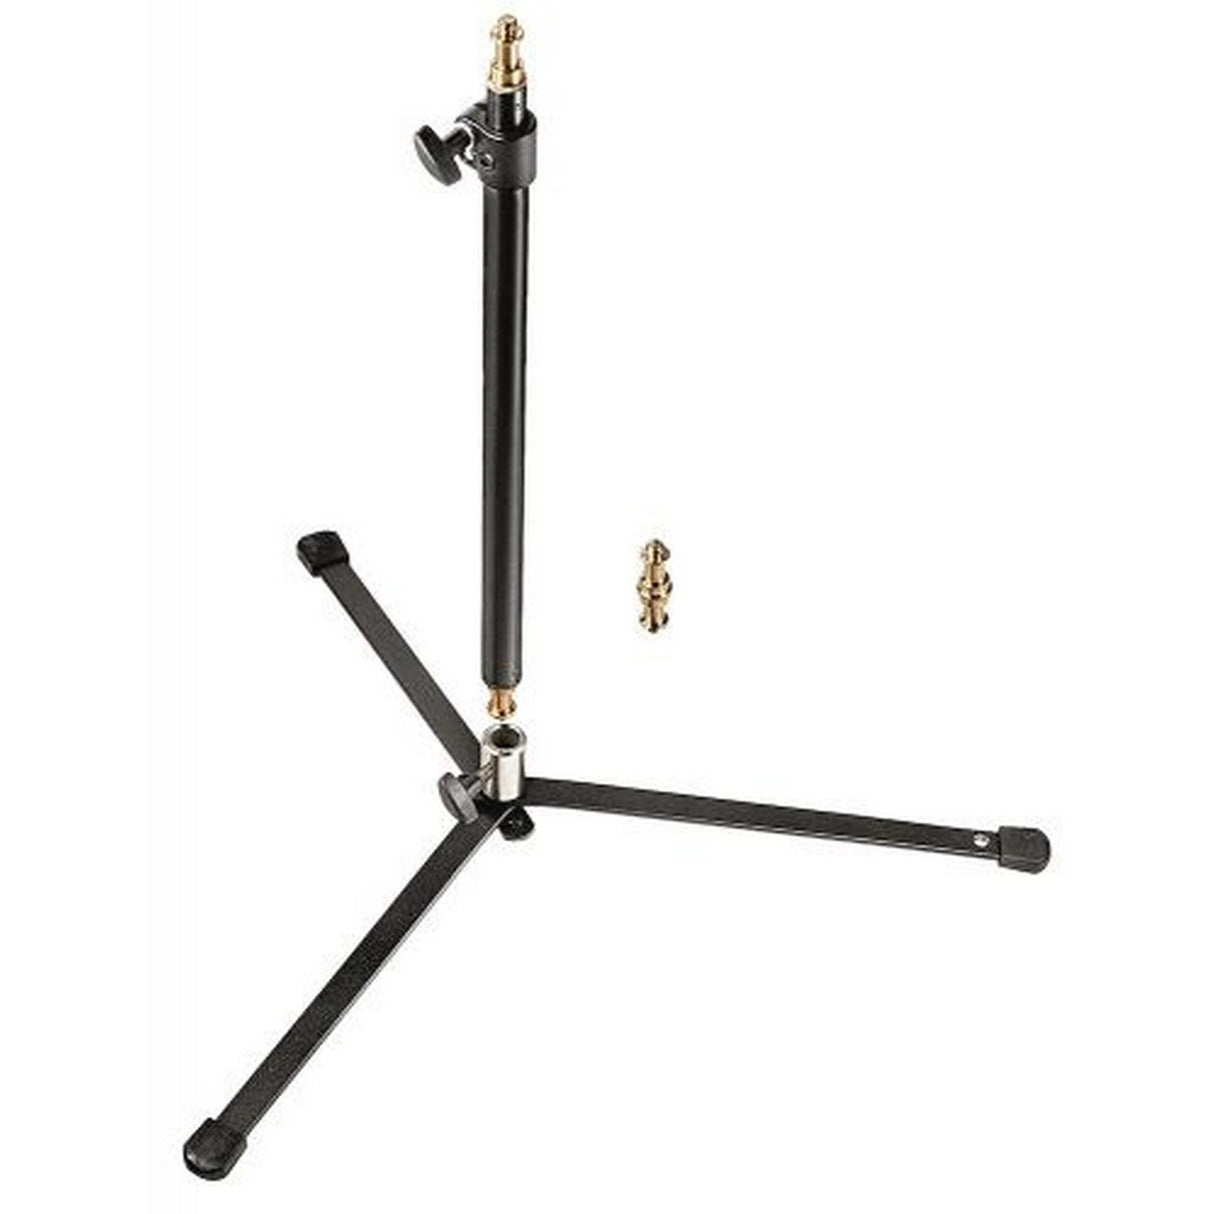 Manfrotto 012B Backlite Stand, Black